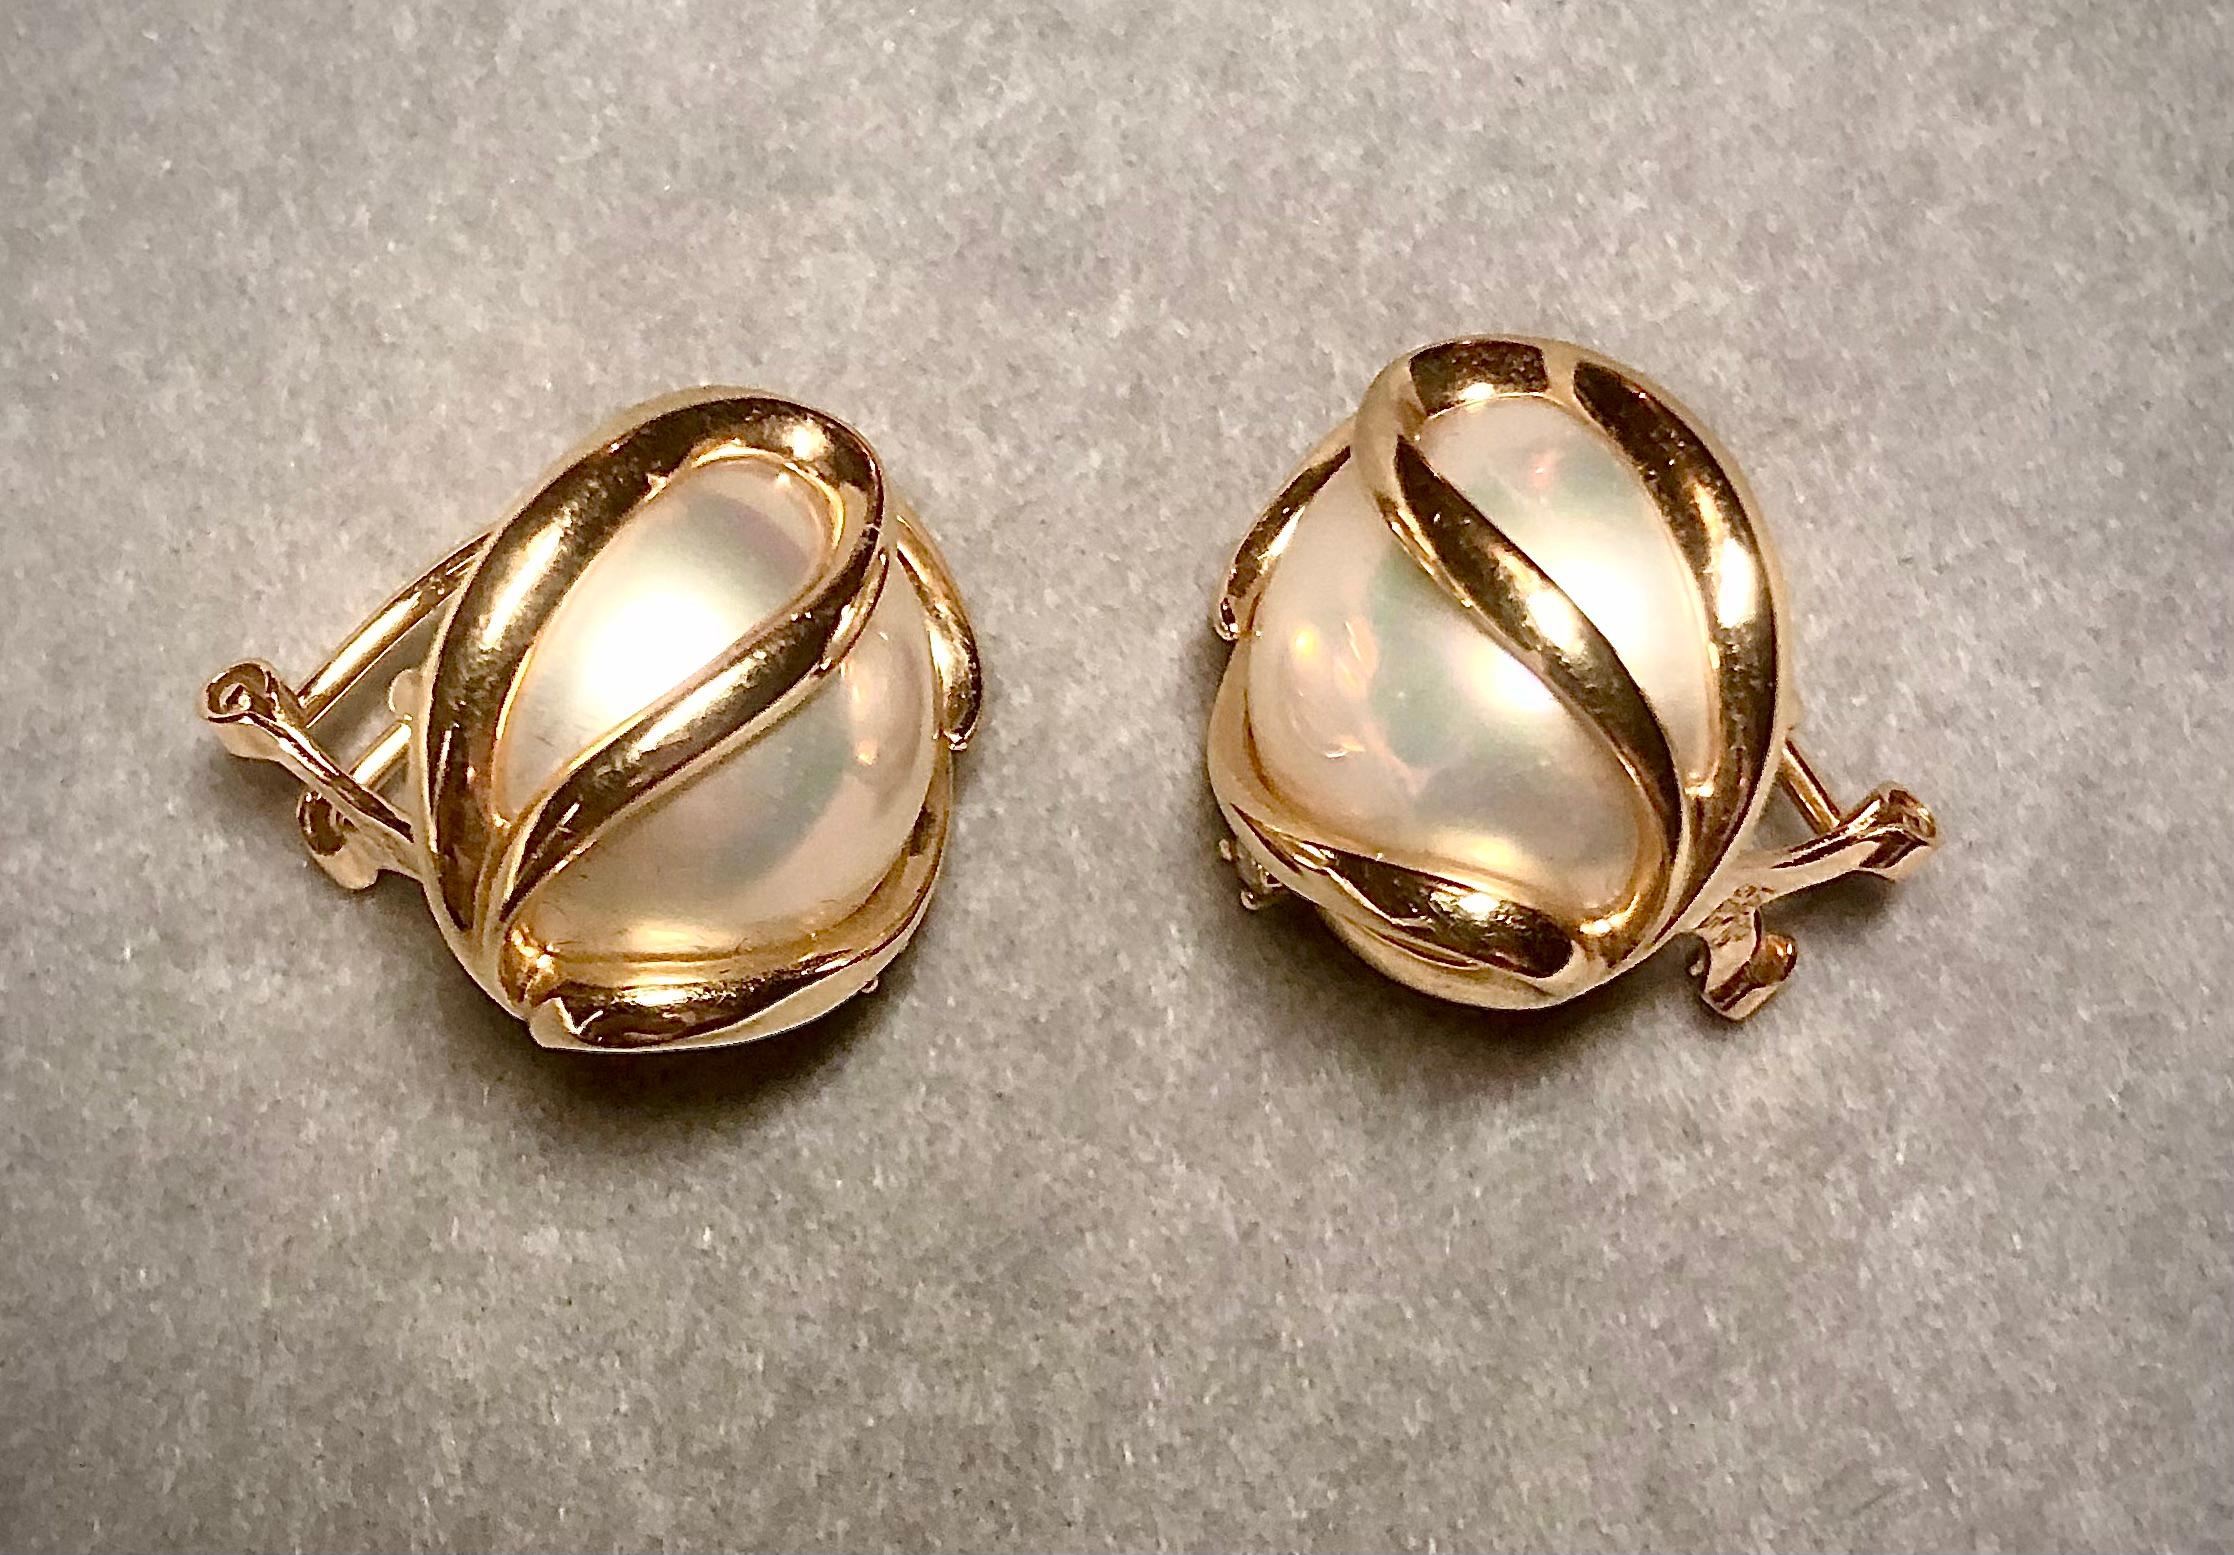 Subtle but very sophisticated design for classic cultured Mabe pearl earrings. Pearls are encased in an elegant 14kt yellow gold swirling setting accented with a small brilliant white diamond. They are secured with a substantial clip.

They are